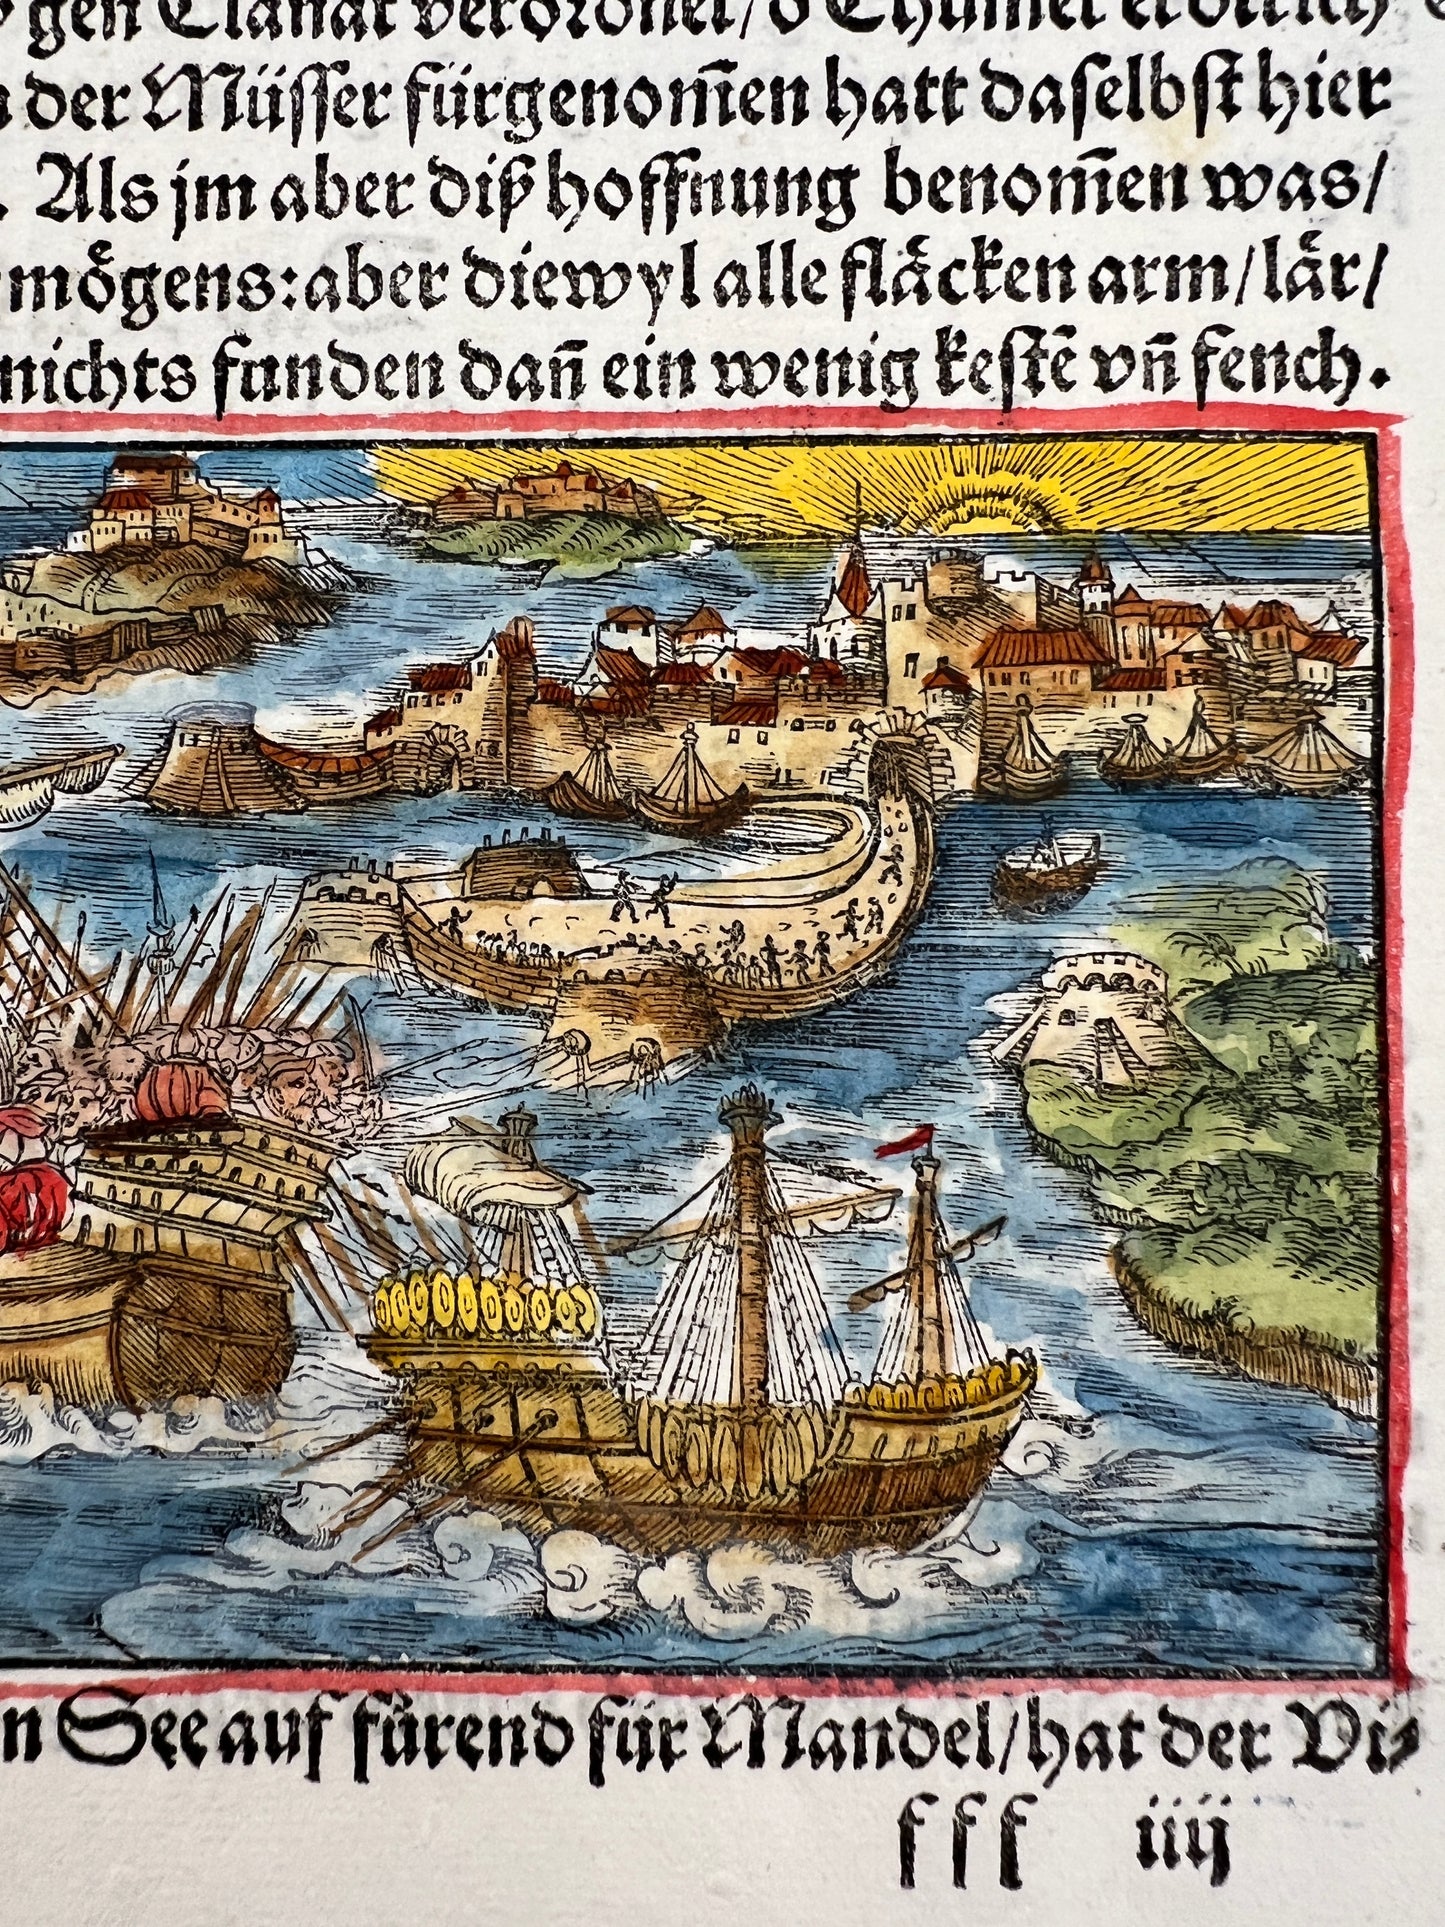 1548 Folio Leaf with Woodcut From The Stumpf Chronicle - Sea Battle off Naples Italy in 1530